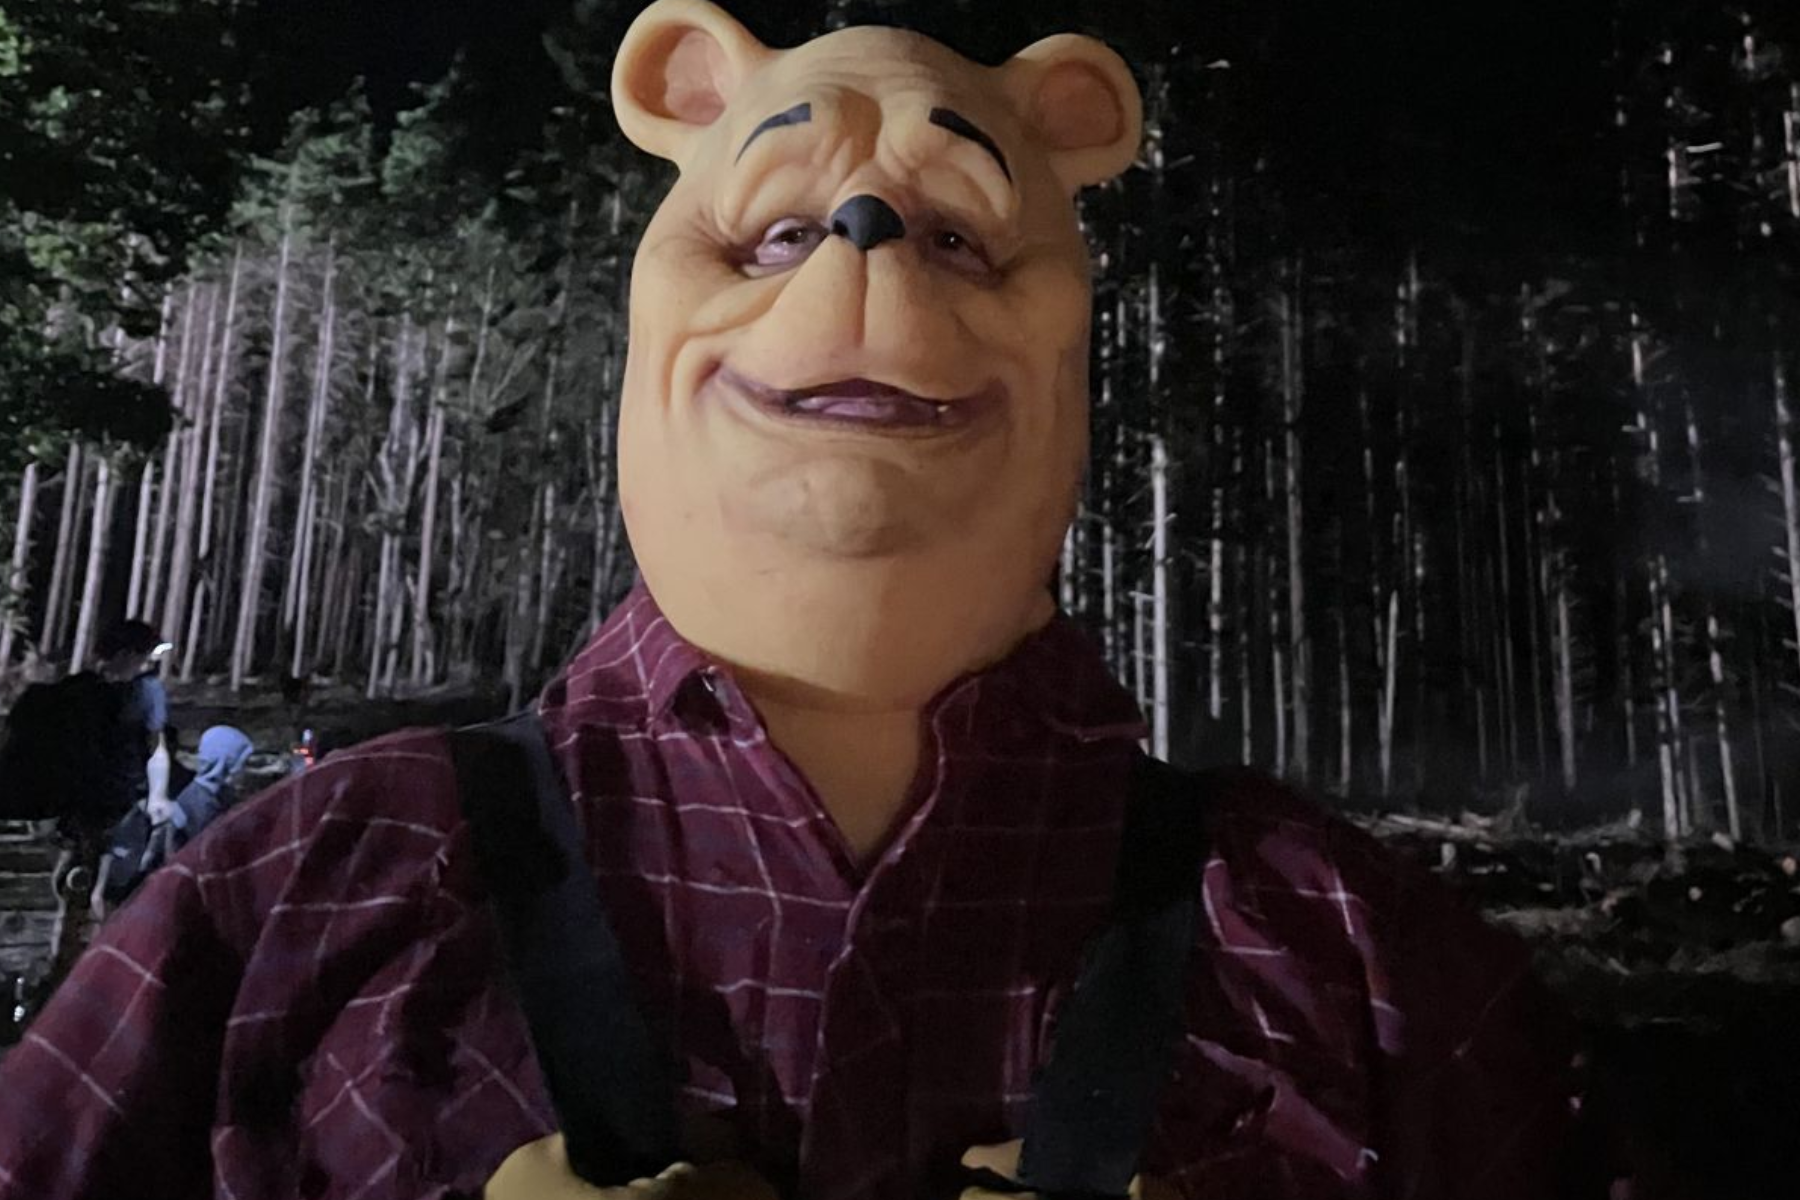 The character Winnie the Pooh from the forest horror film